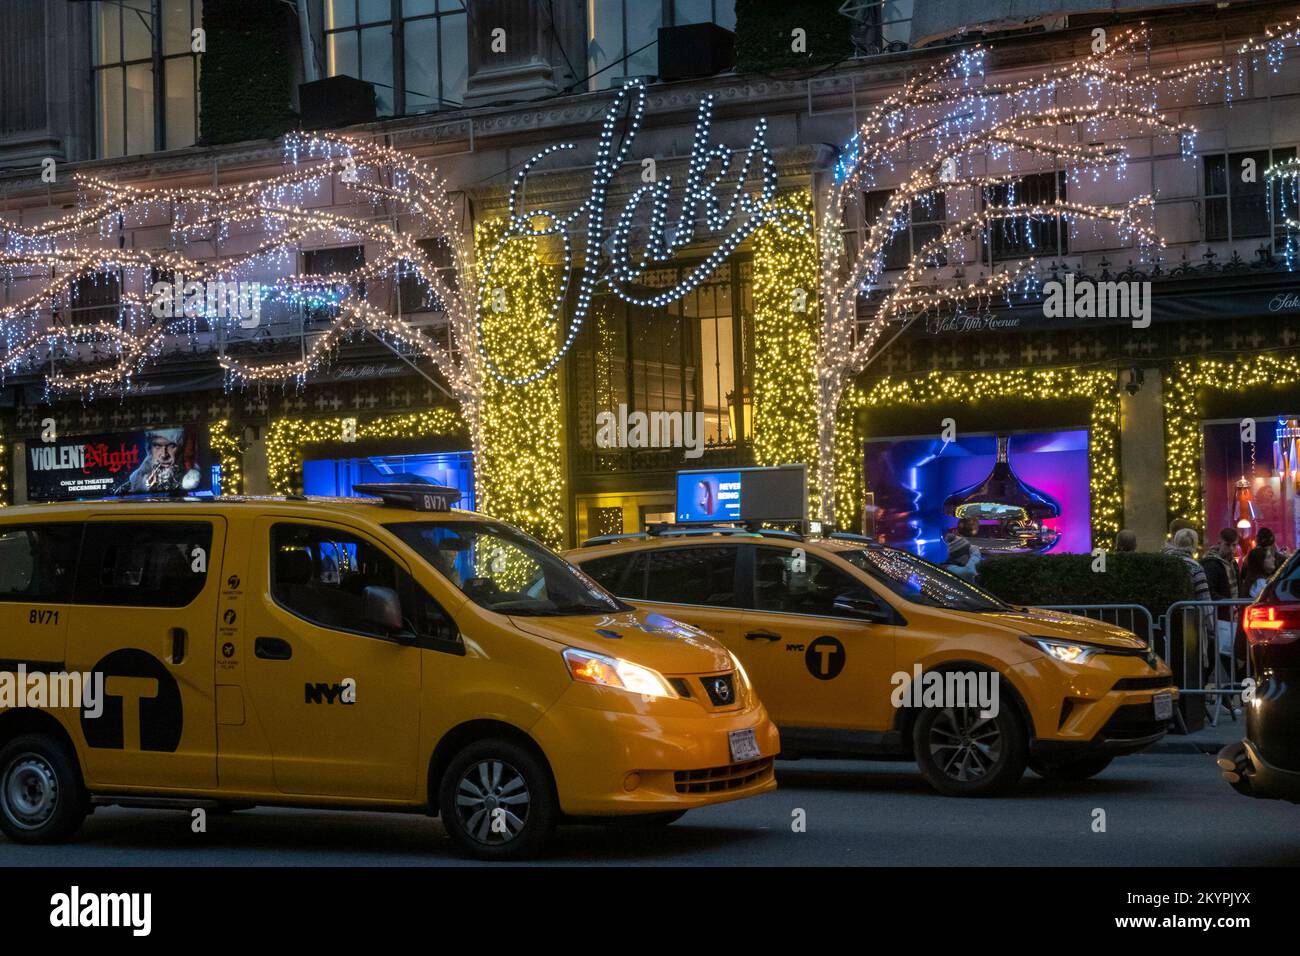 NYC's holiday windows celebrate city's resilience in 2021